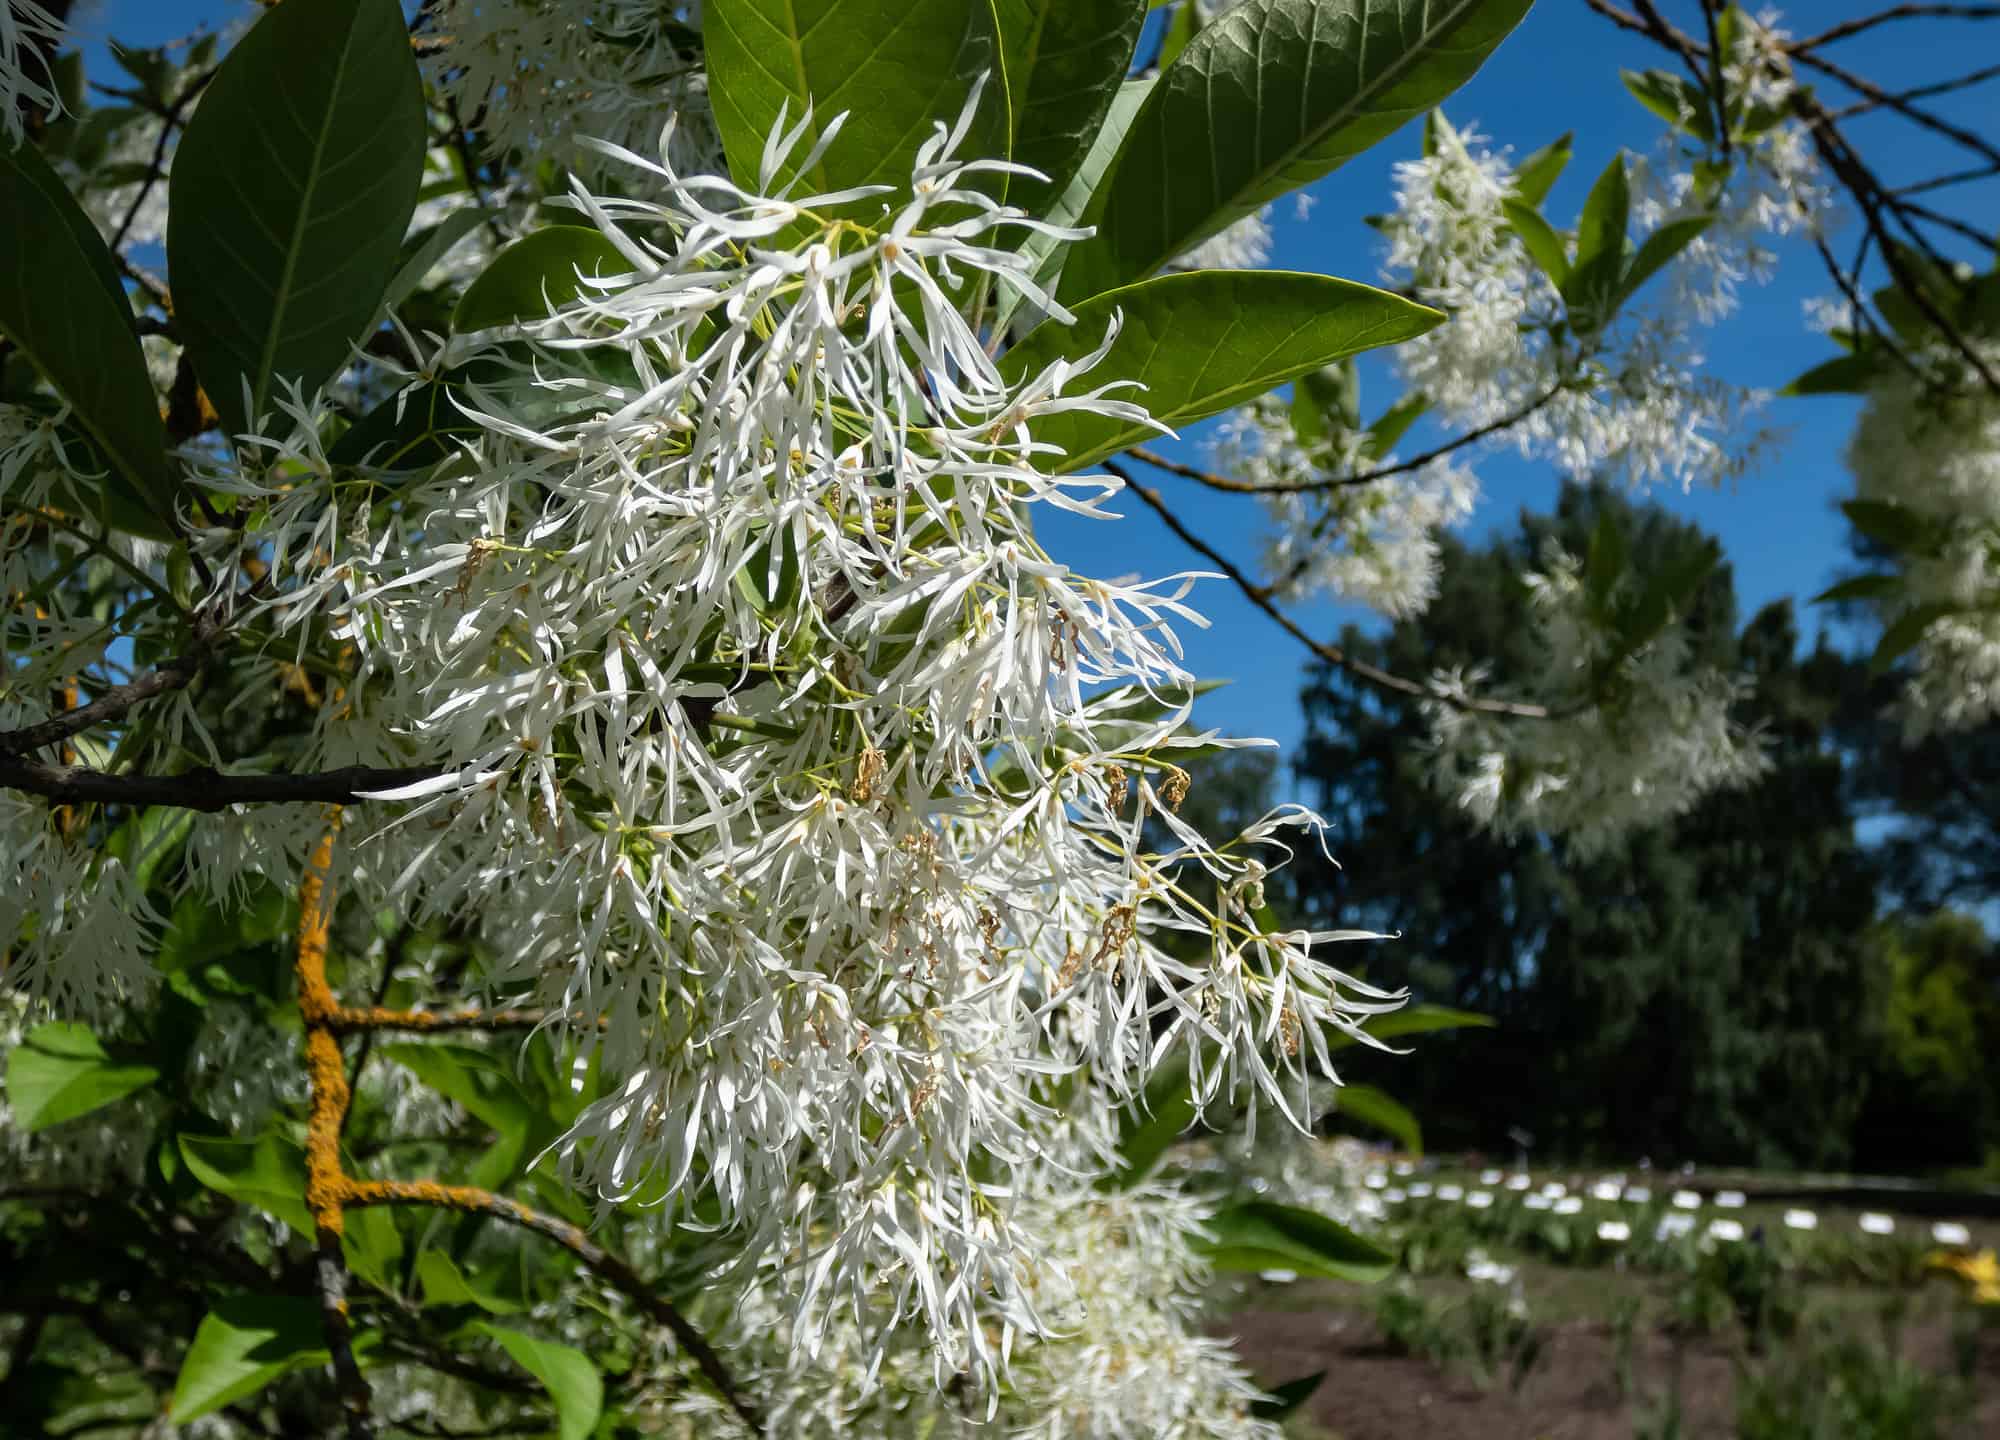 Small tree The White fringetree (Chionanthus virginicus) with richly-scented, pure white flowers in the garden with bright blue sky in the background